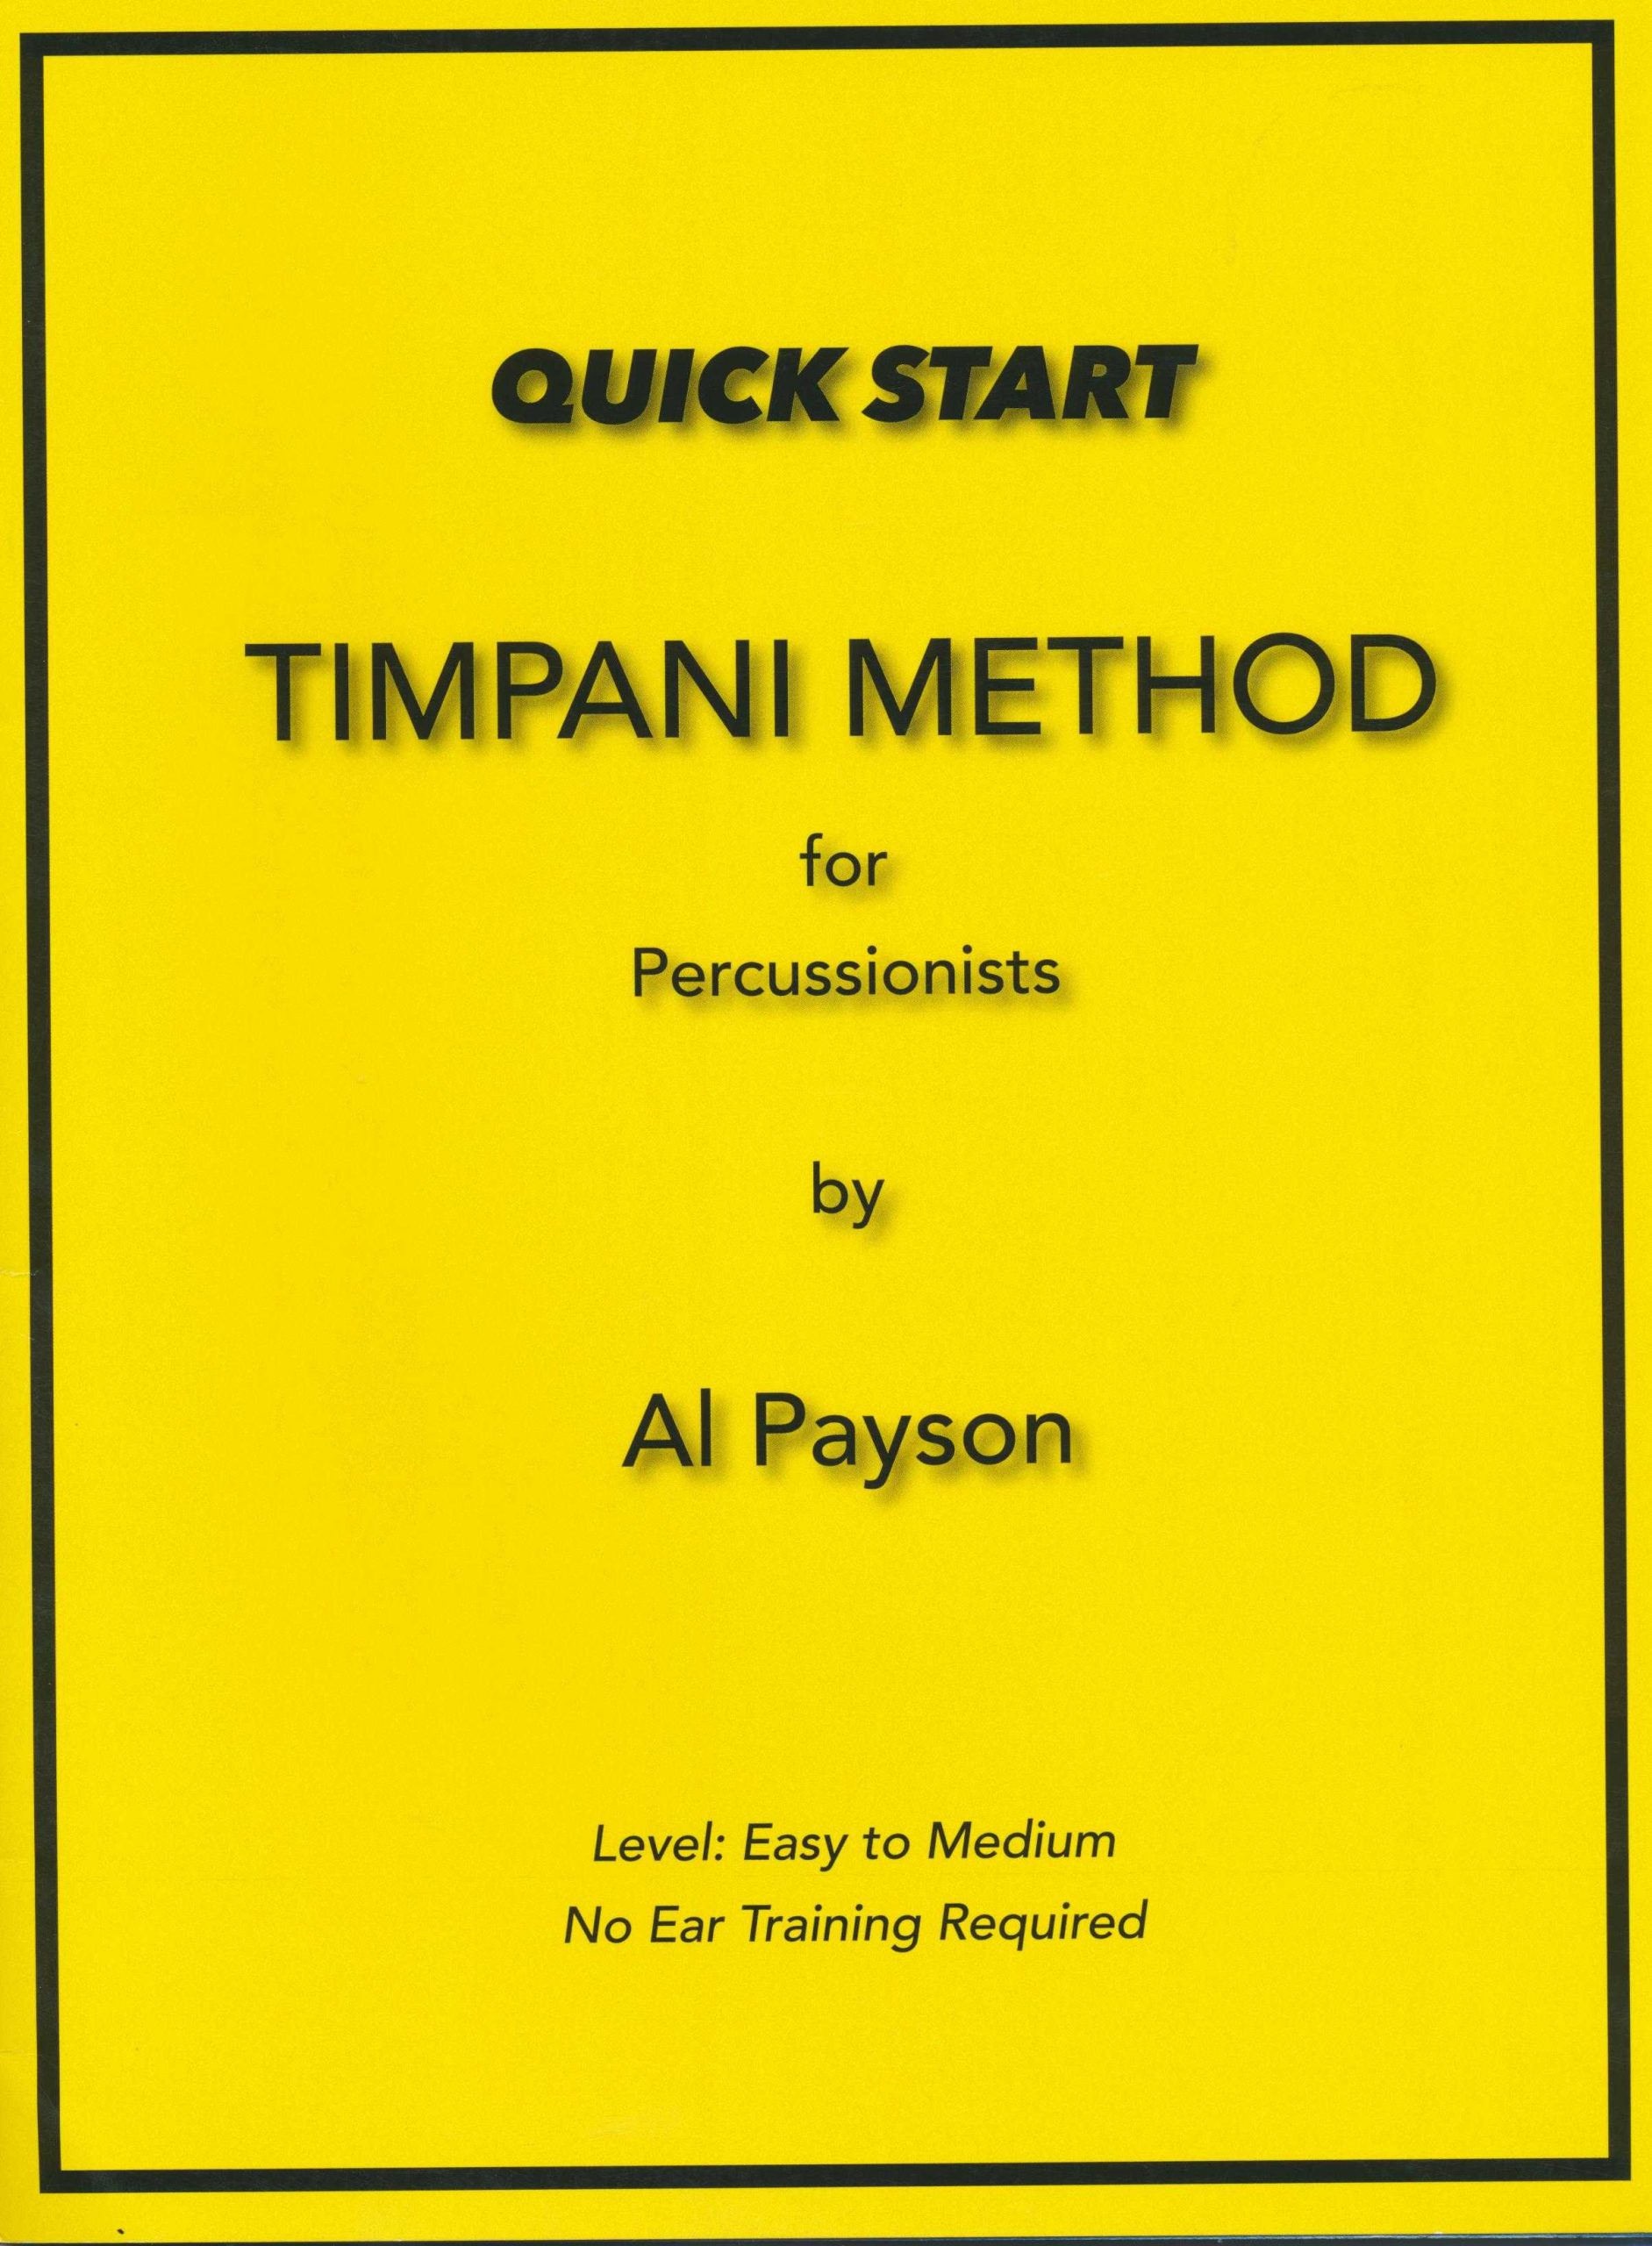 Quick Start Timpani Method for Percussionists by Albert Payson